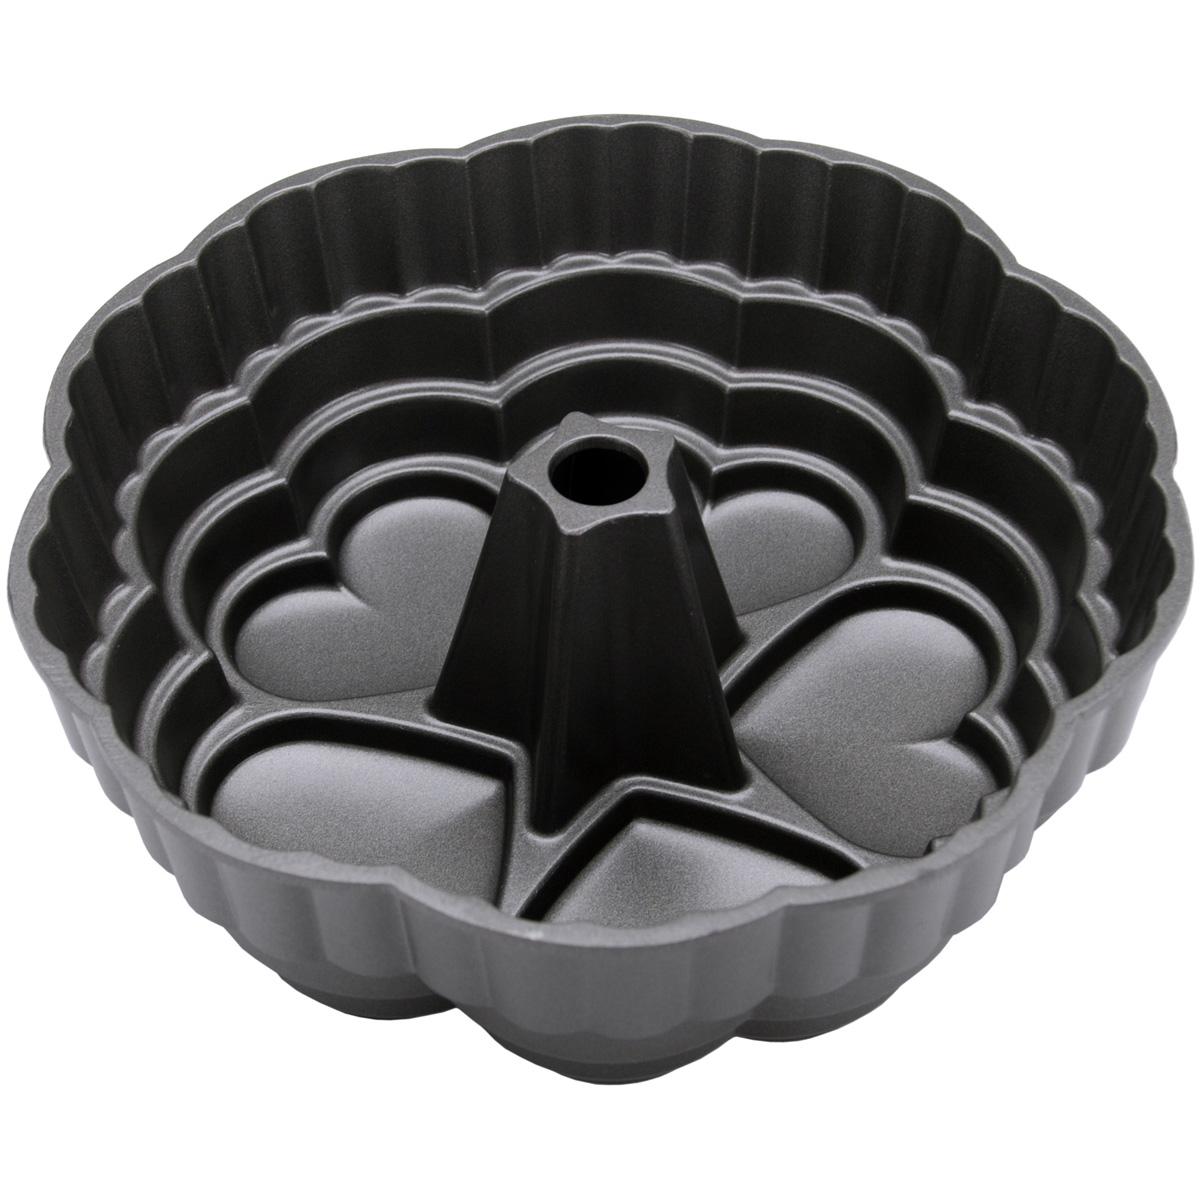 Wilton Dimensions Queen Of Hearts Cake Pan (3.5 inches high x 9.675 inches diameterUses approximately 6.5 cups of batter (not included) )